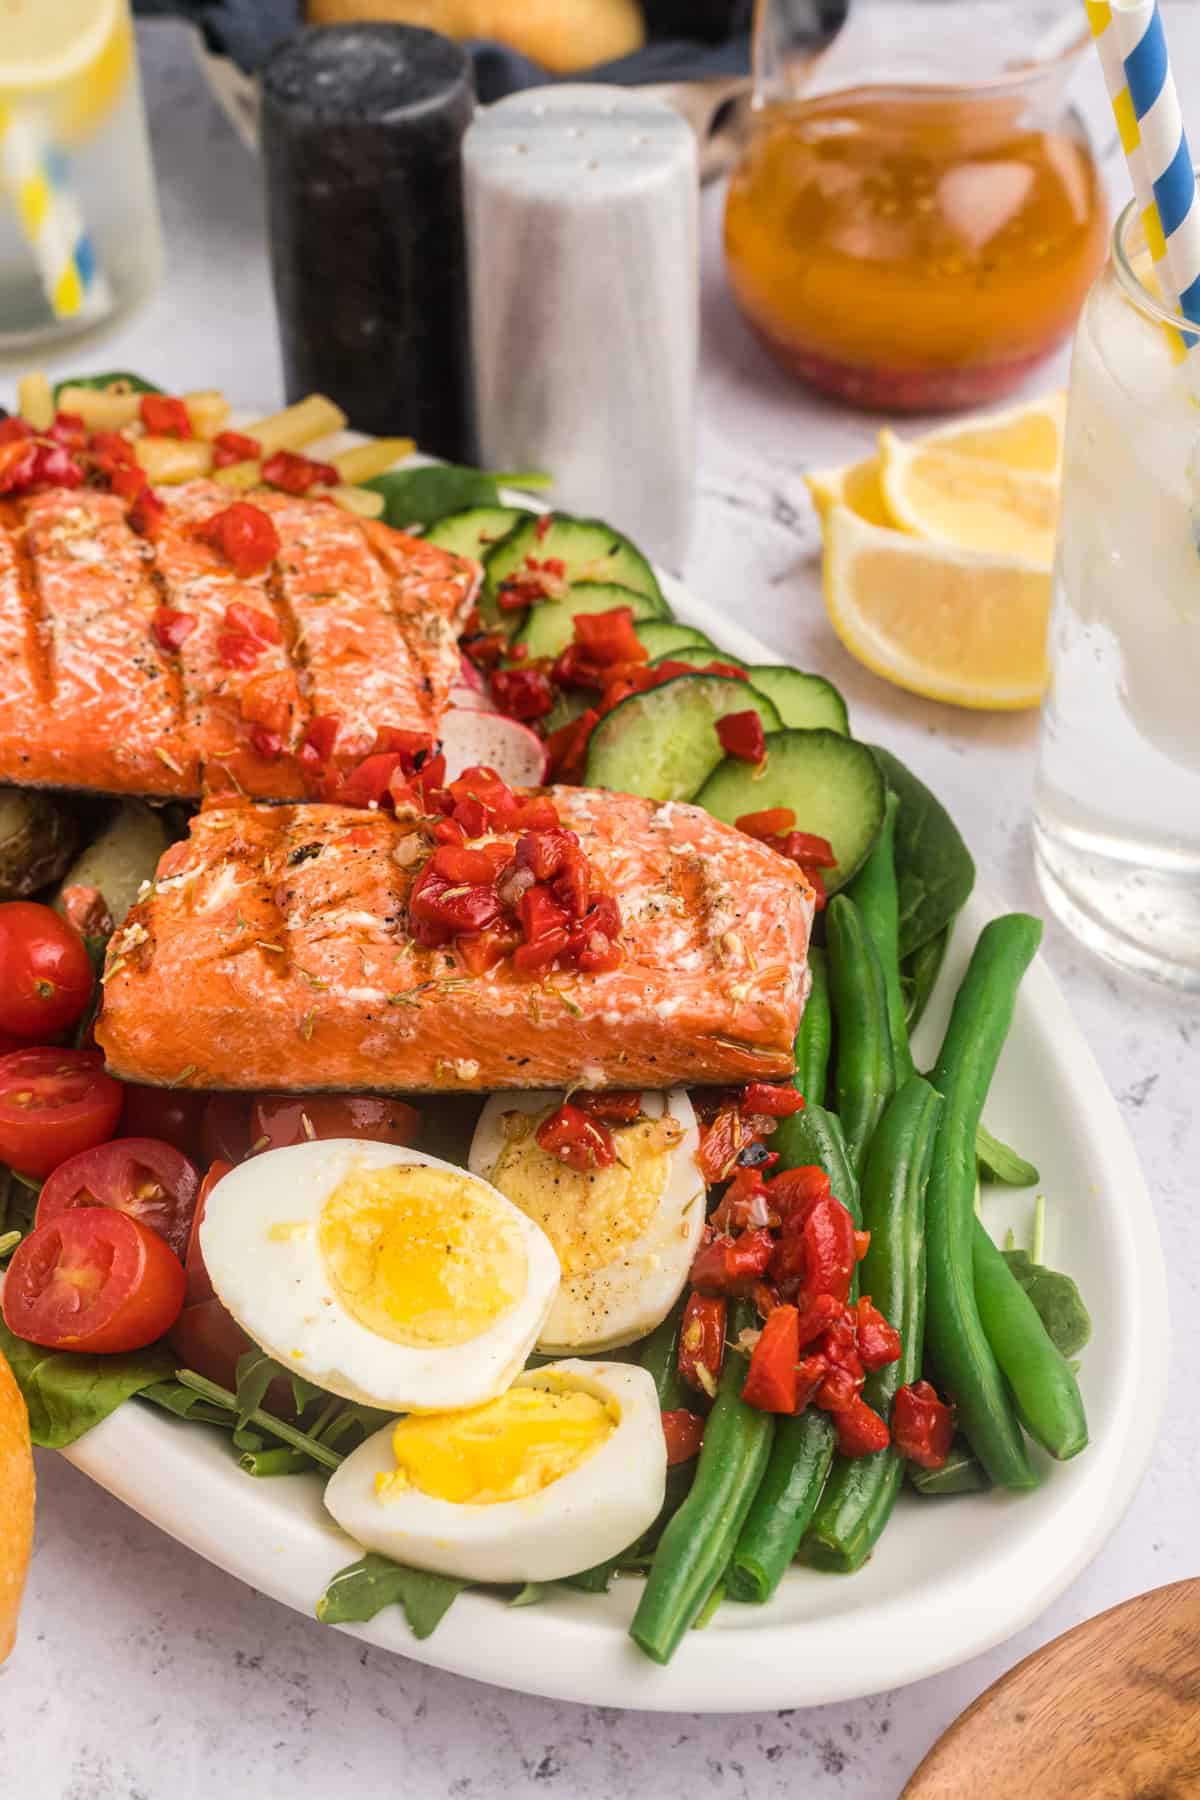 Side view of salmon Nicoise salad with hard boiled eggs, green beans and a roasted red pepper dressing.